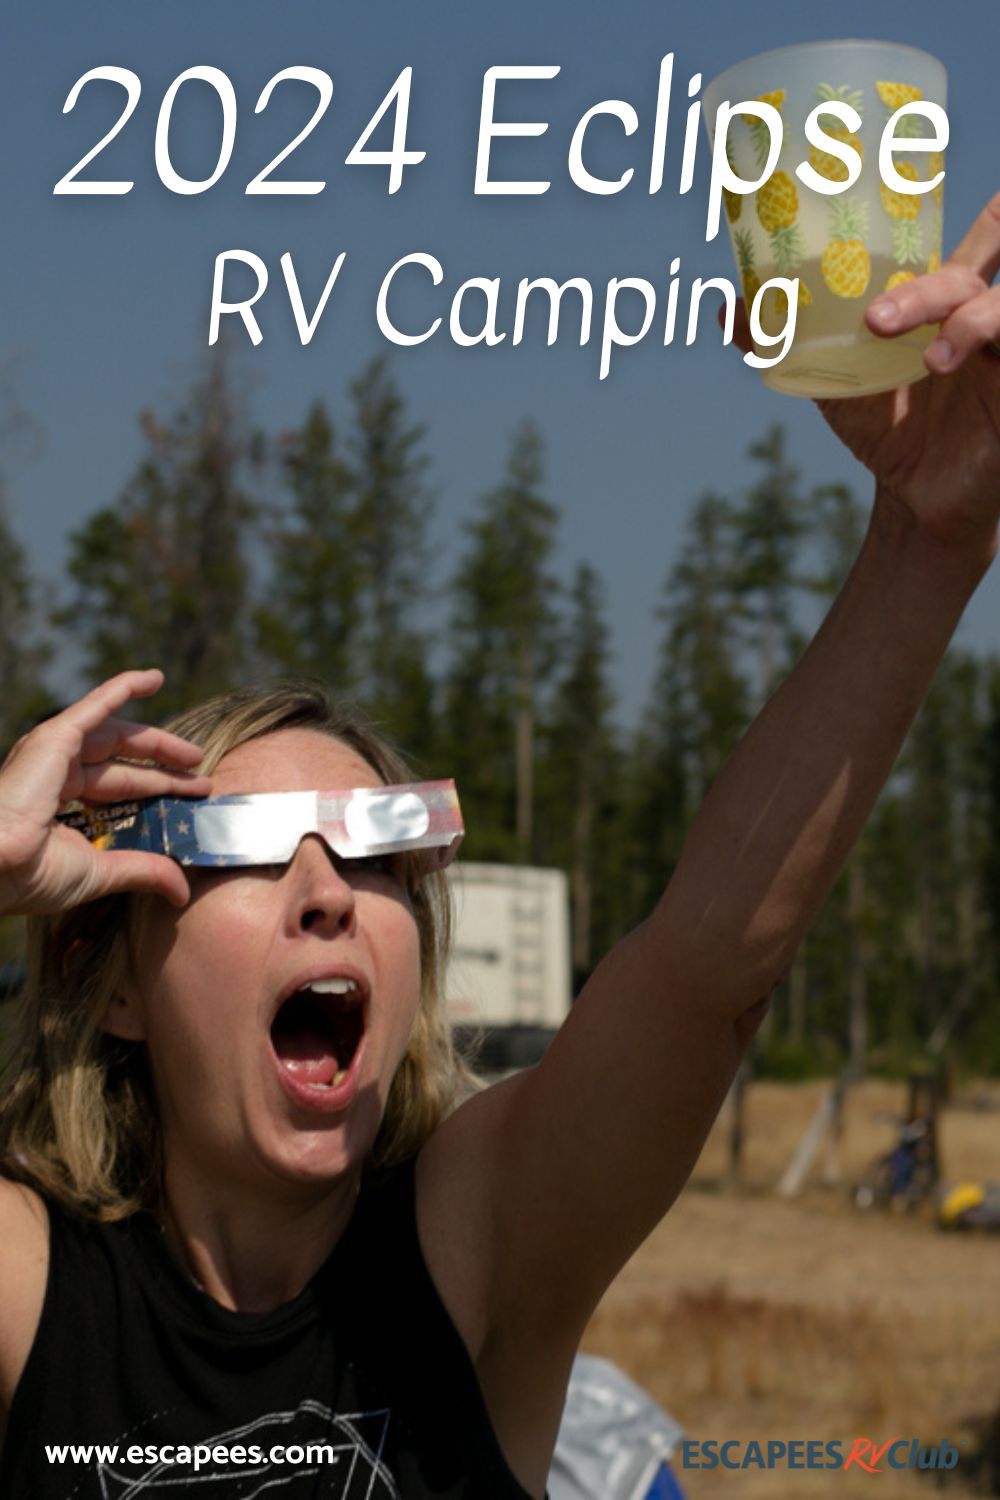 2024 Eclipse RV Camping Options 4